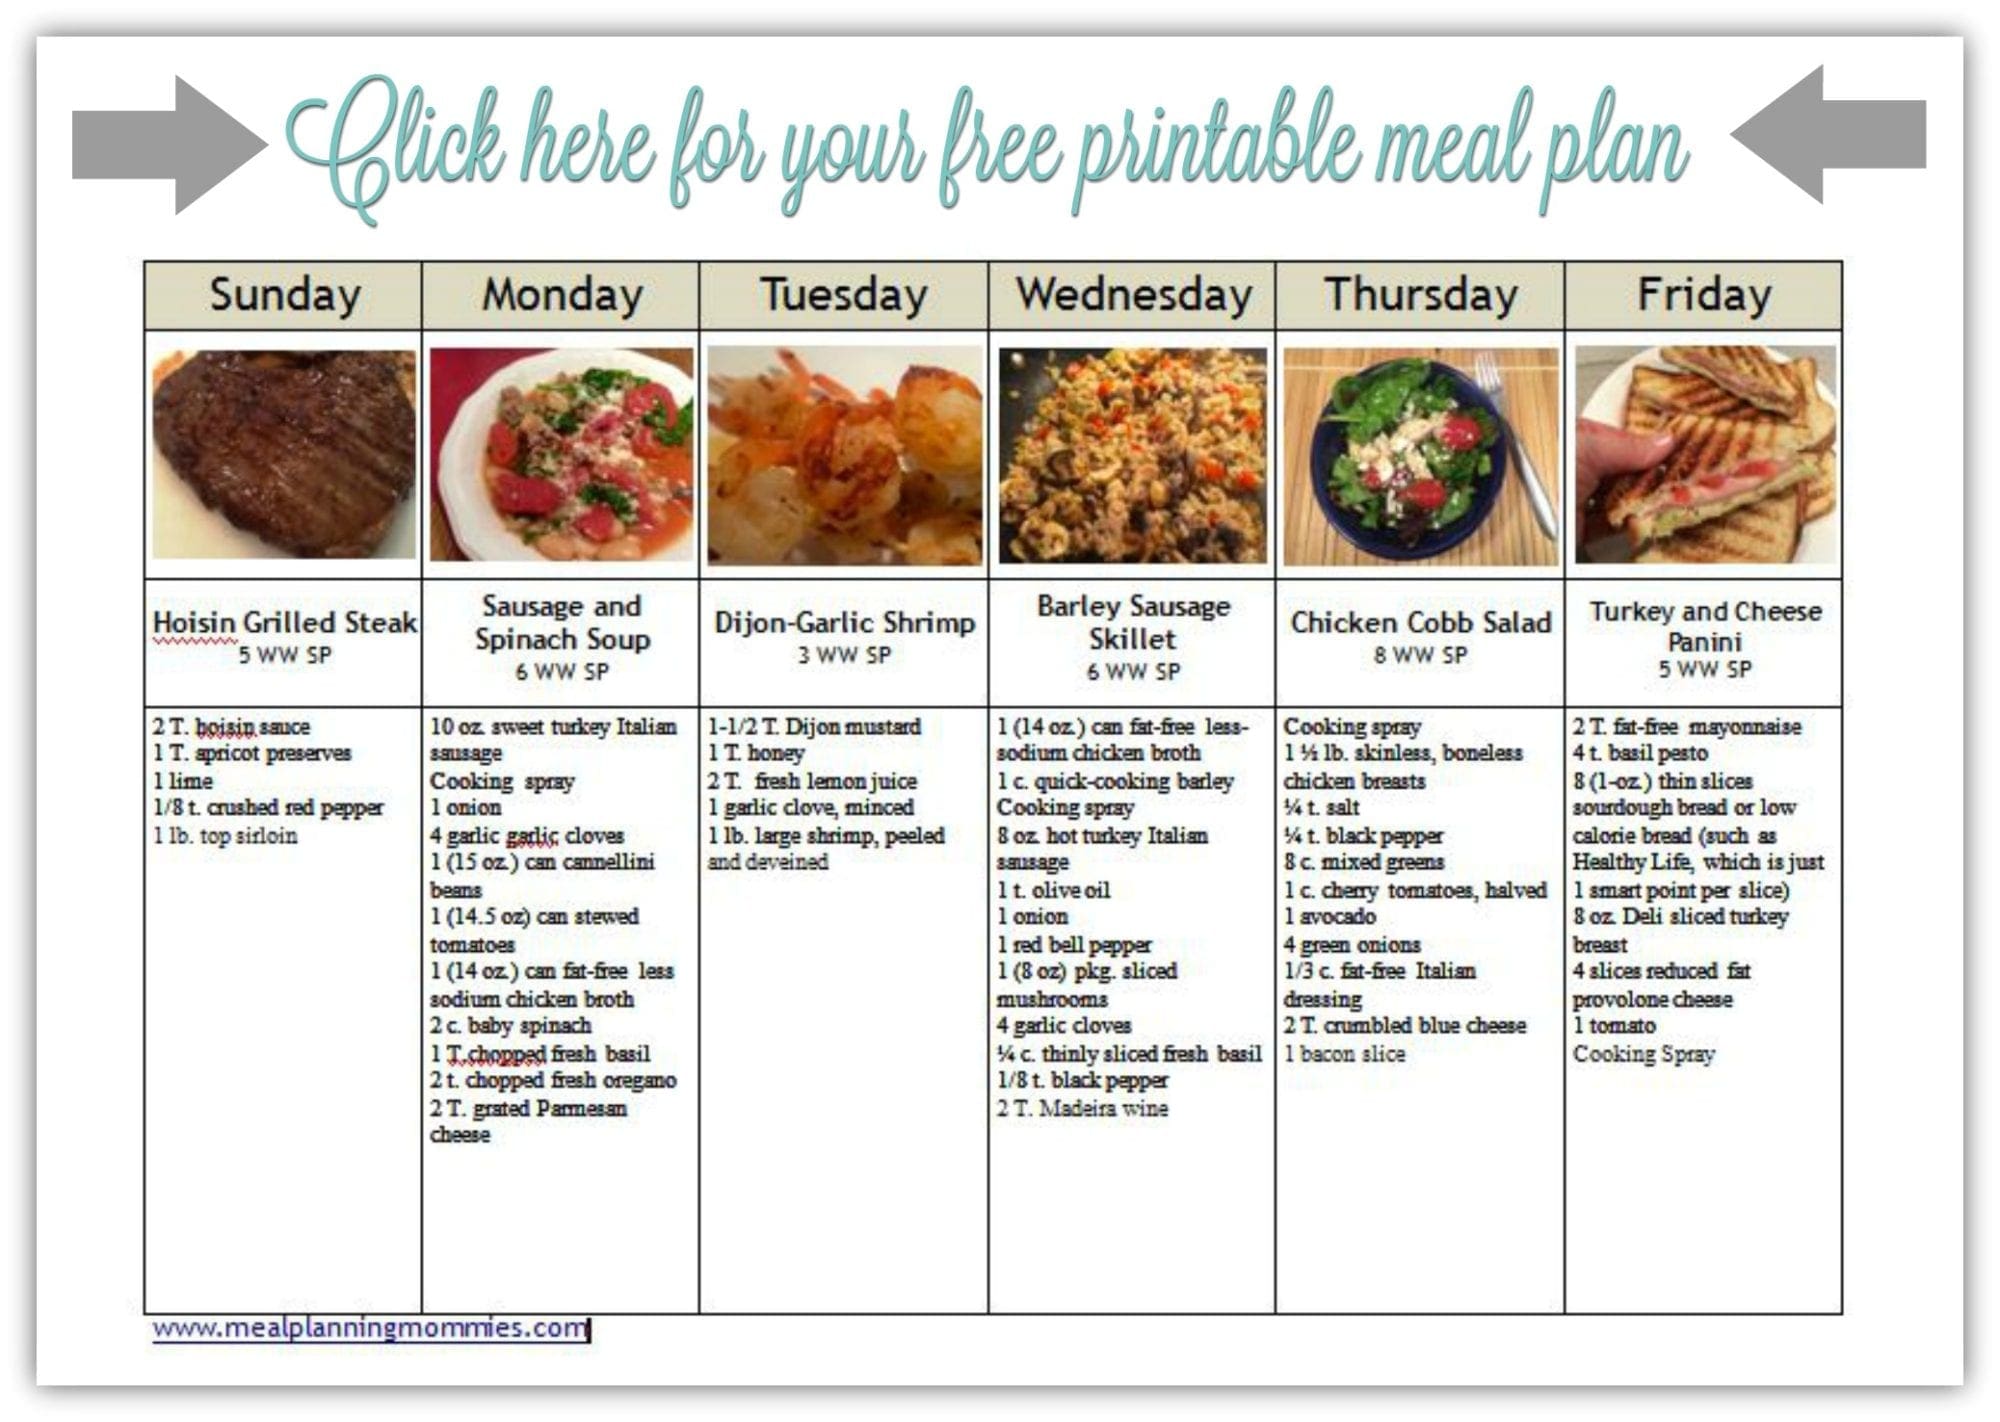 meal plan picture